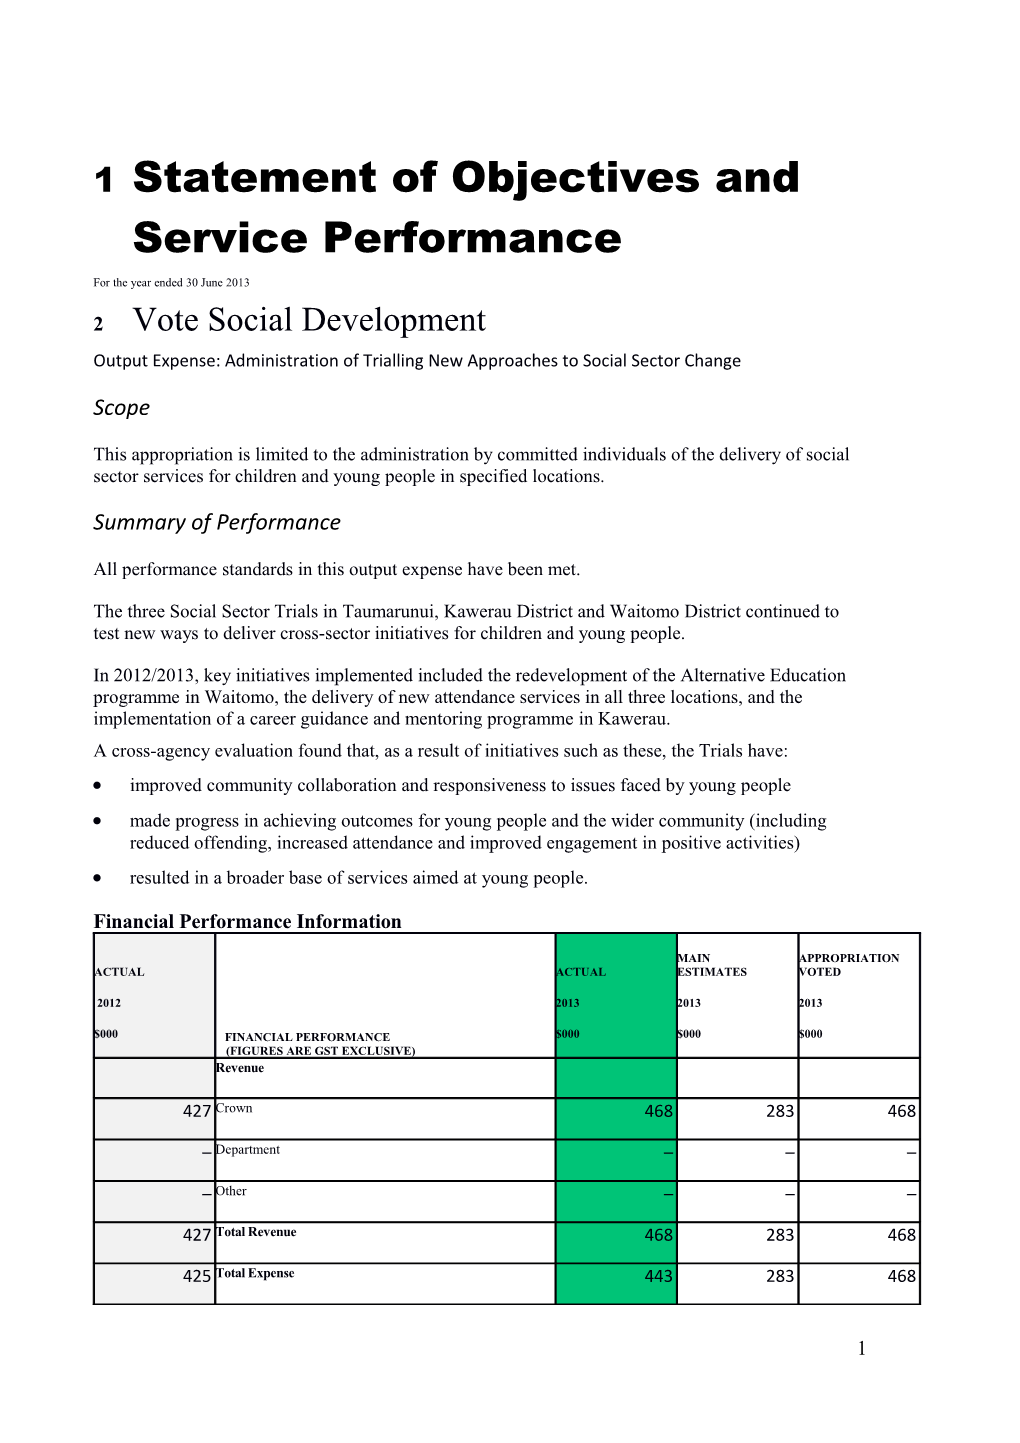 Statement of Objectives and Service Performance